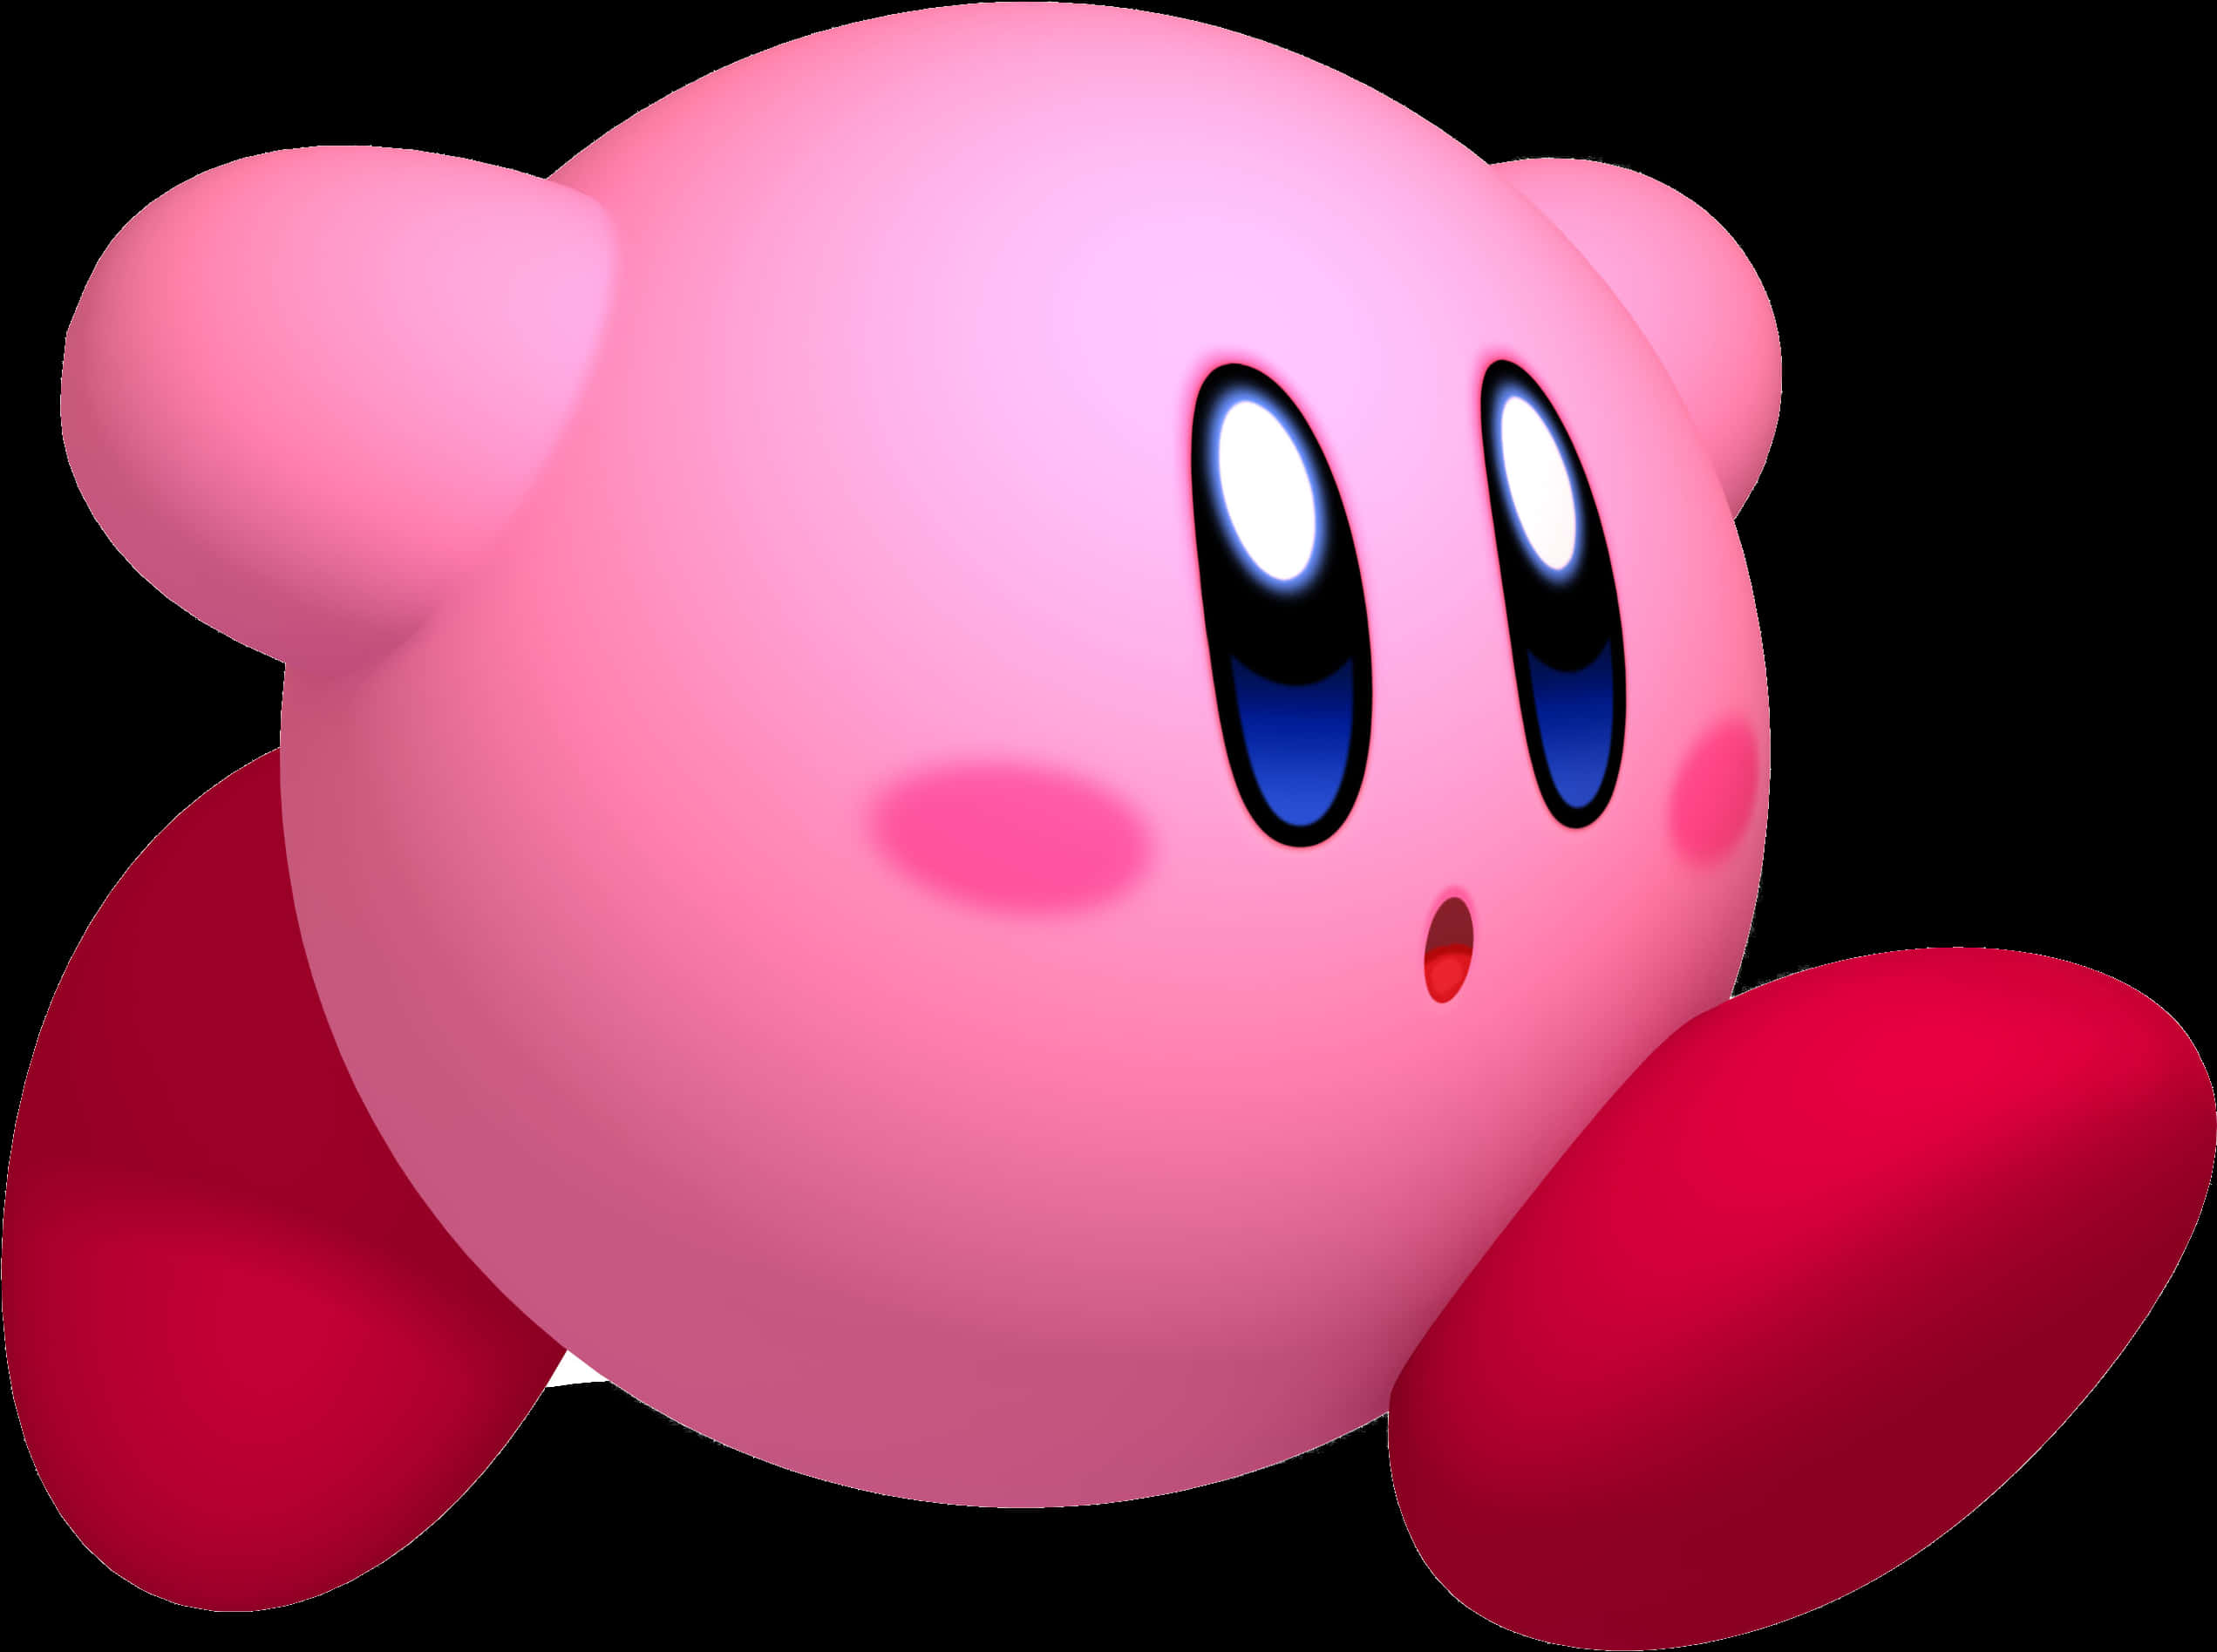 A Pink Round Object With Blue Eyes And Red Arms